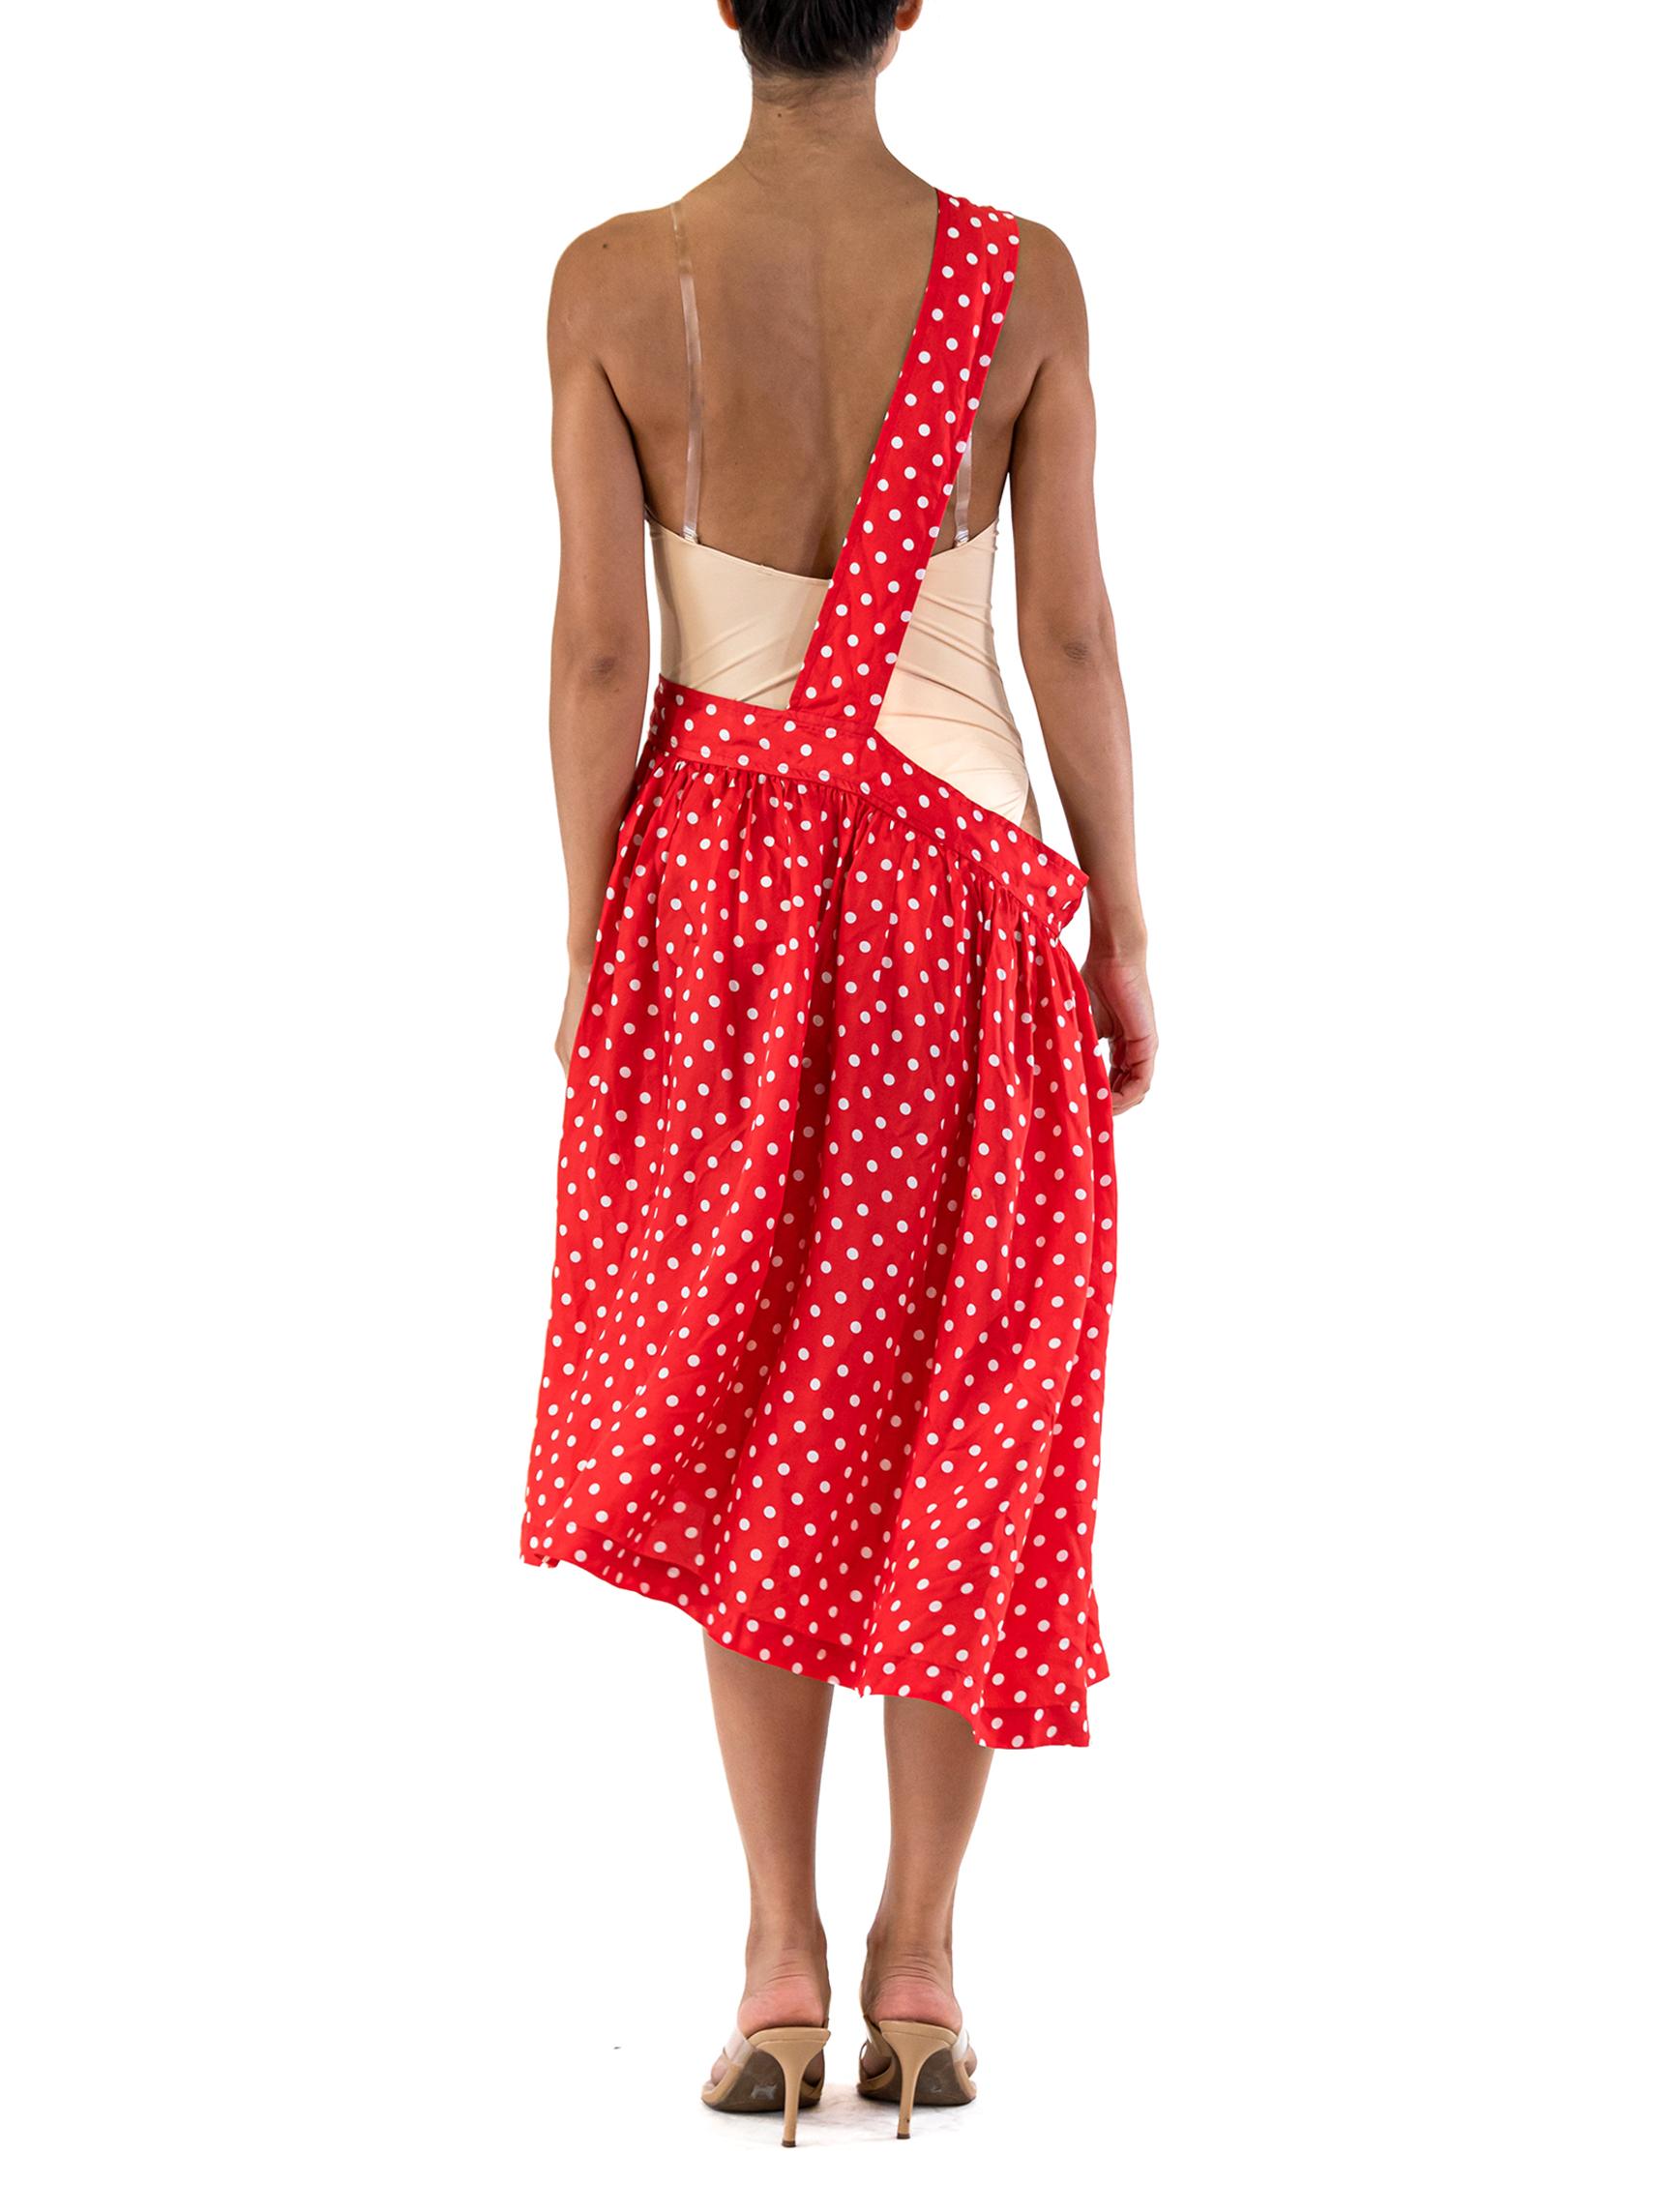 2000S COMME DES GARCONS Red & White Rayon Polka Dot Skirt For Sale 2